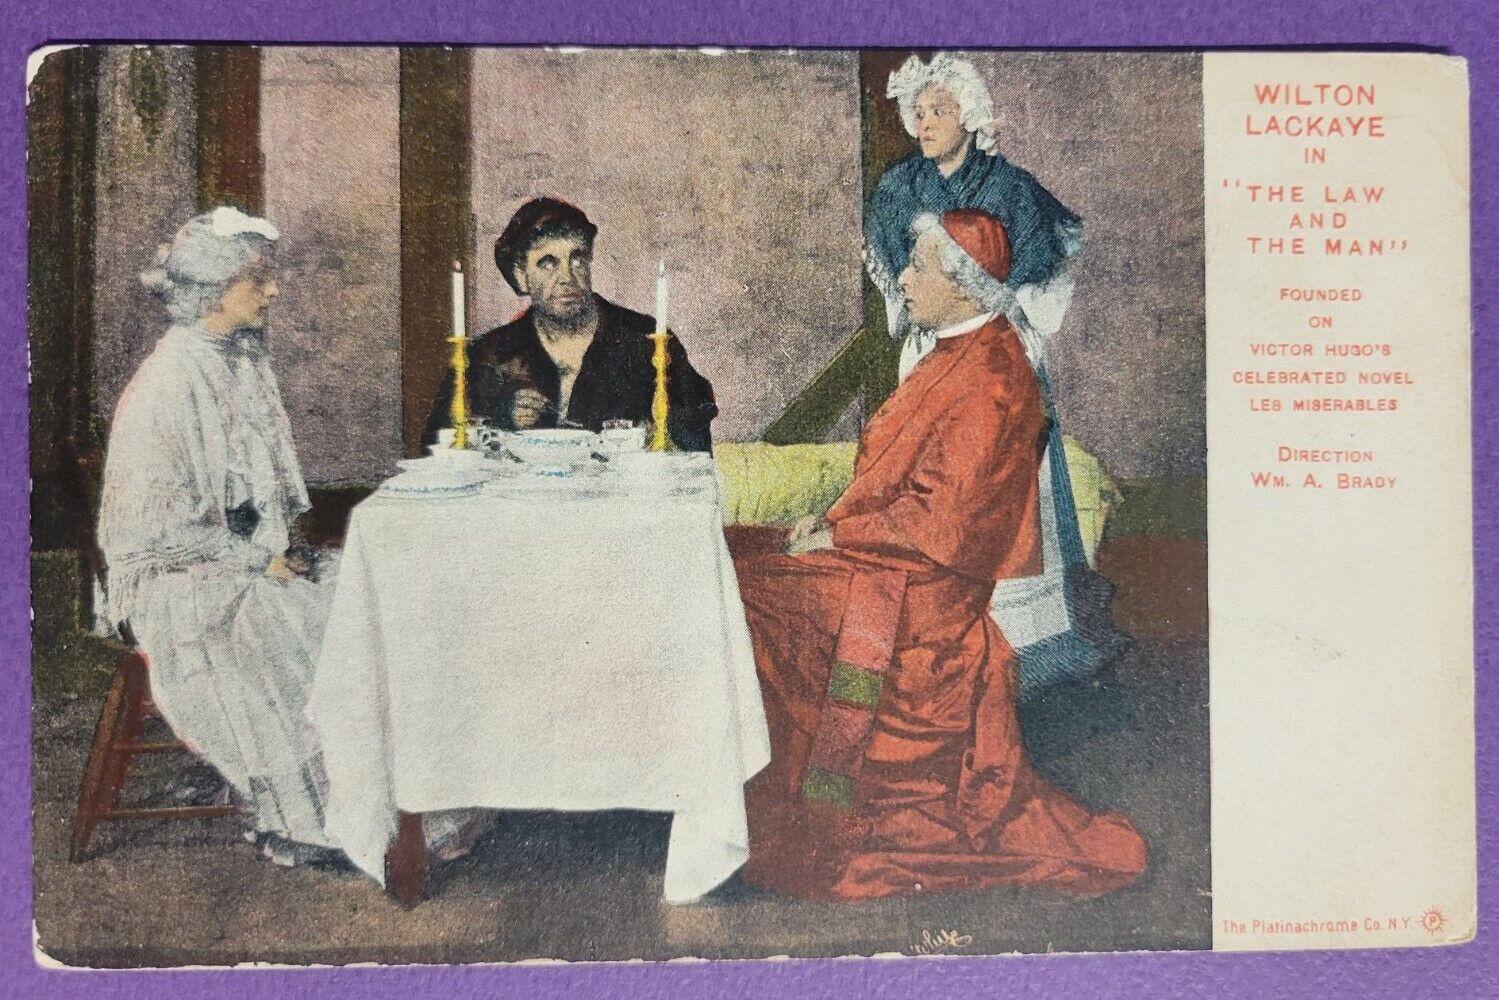 OLD POSTCARD WILTON LACKAYE IN THE LAW AND THE MAN  LES MISERABLES DINNER SCENE